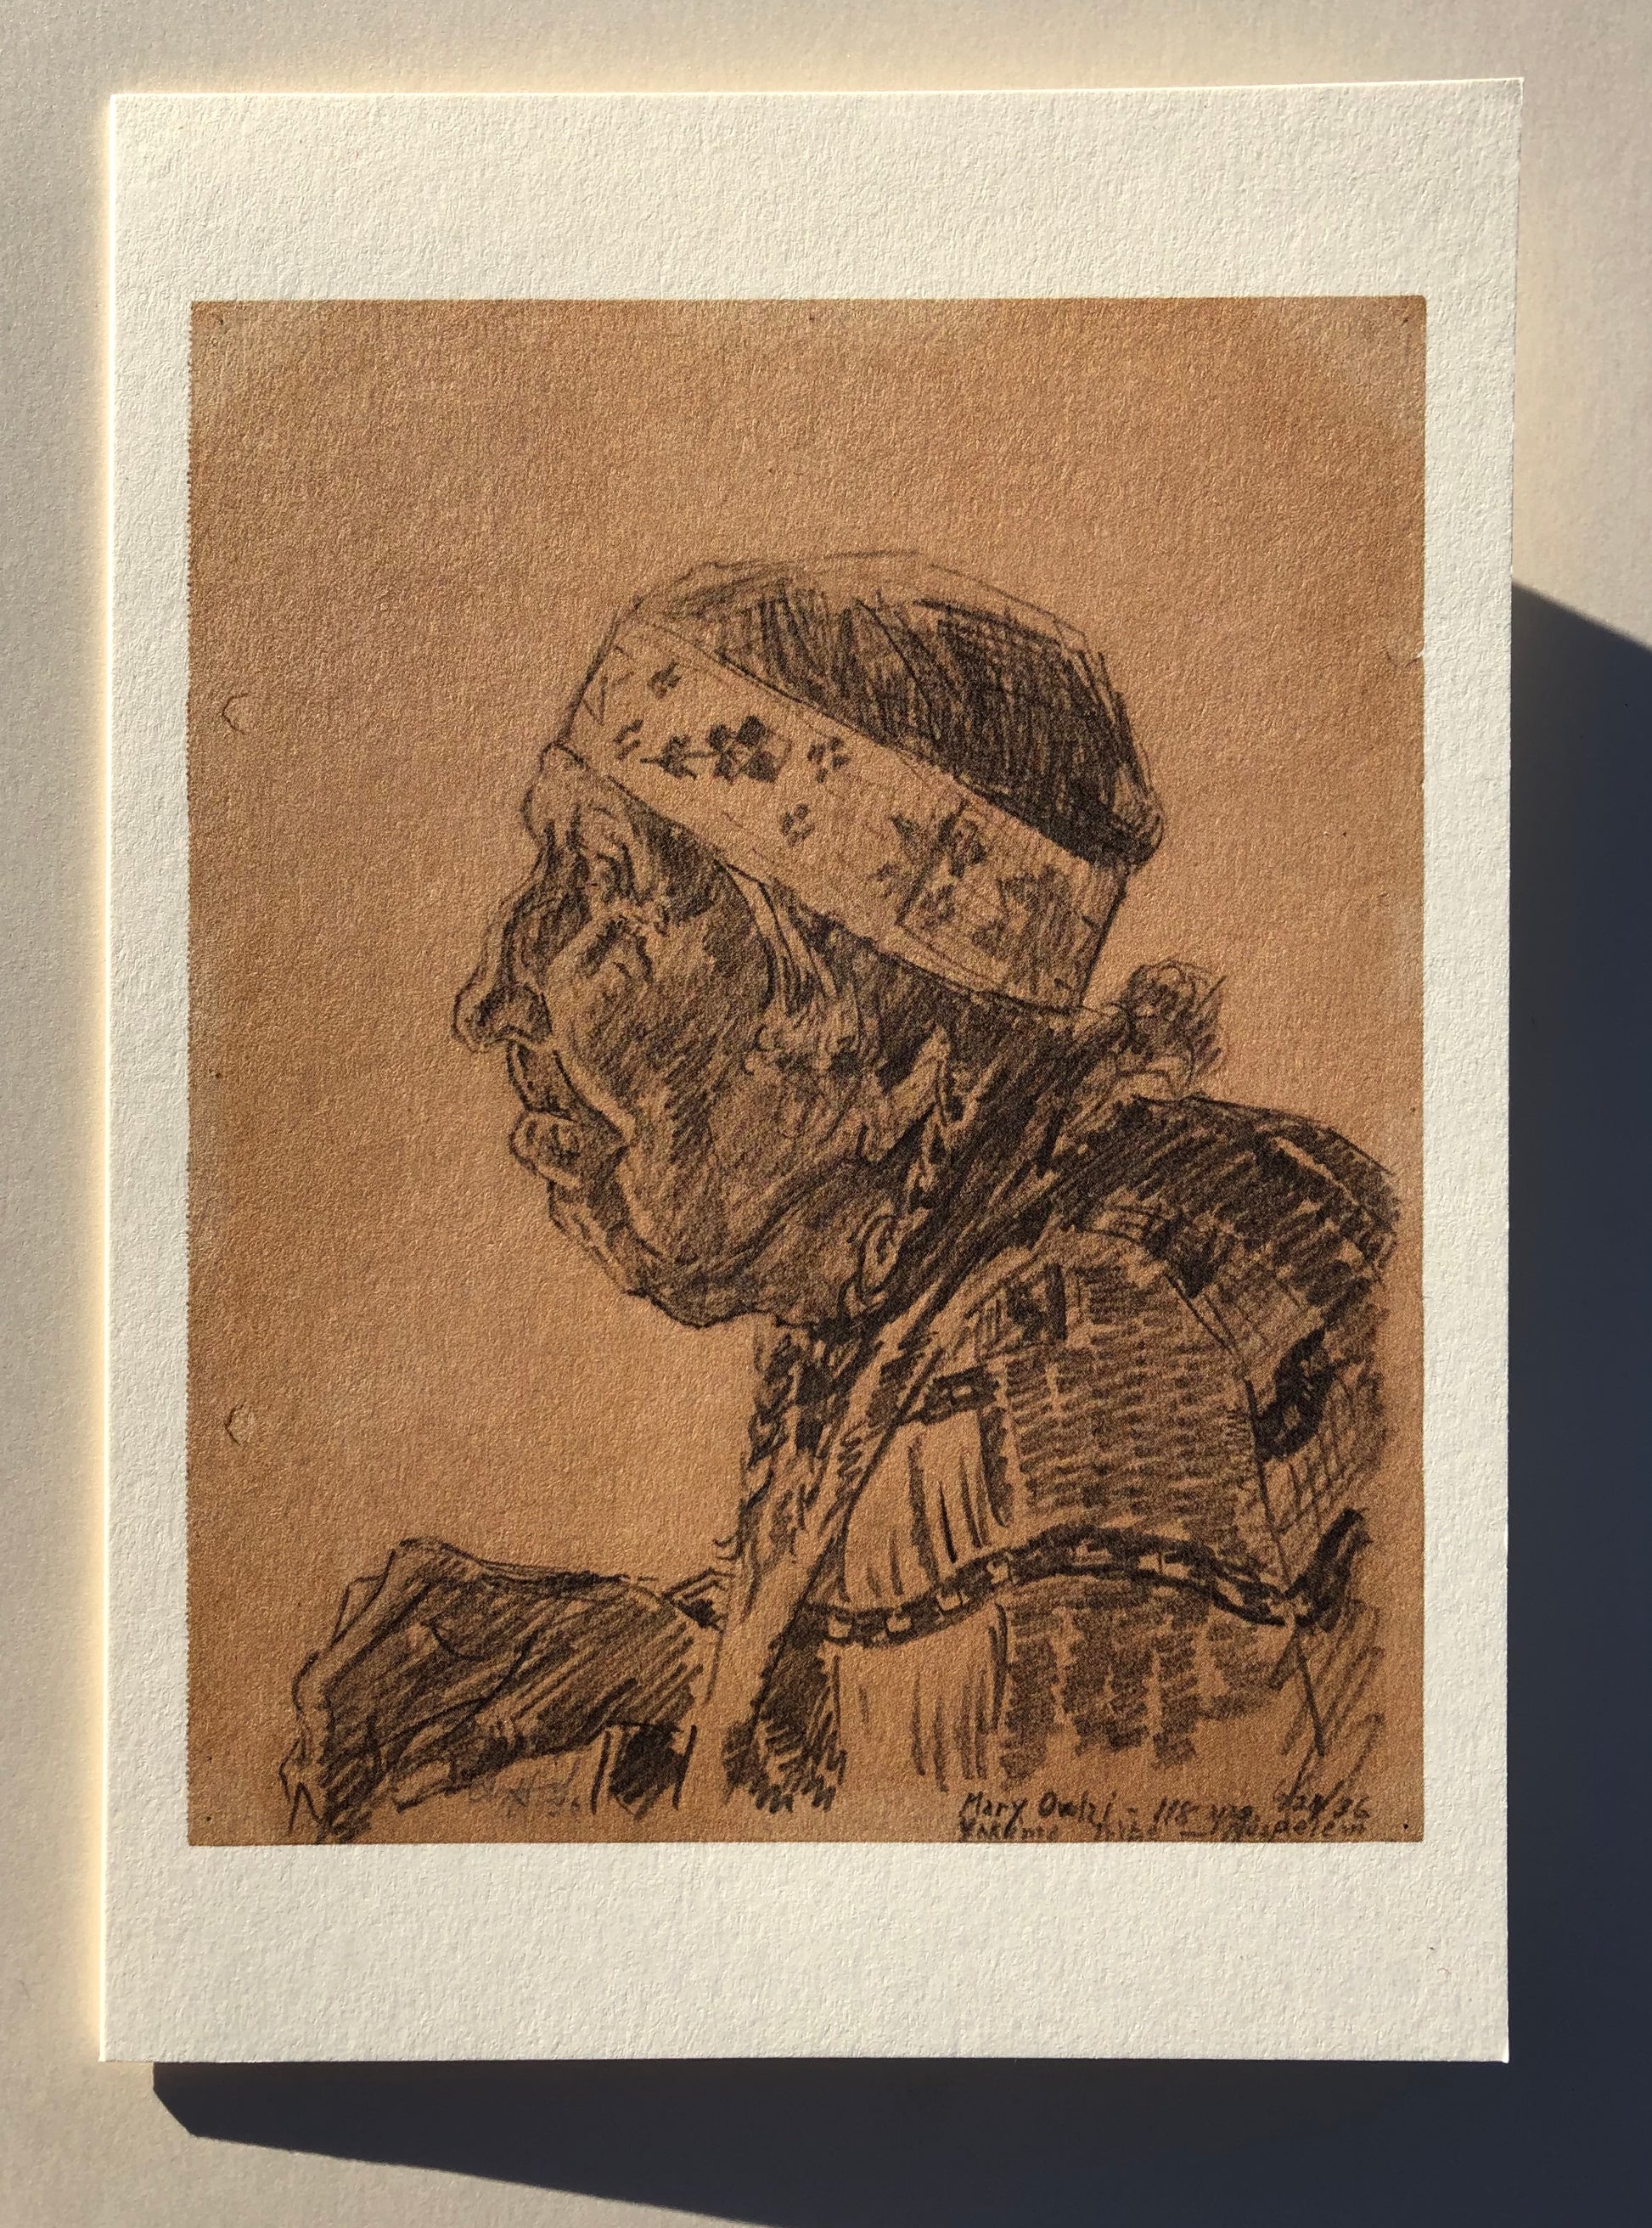 Portrait of Mary Owhi by Clyfford Still, PD-55, 1936.  Printed on beautiful eggshell paper, this limited edition post card also features a photograph on the back, taken by Clyfford Still, of Mary Owhi Moses.